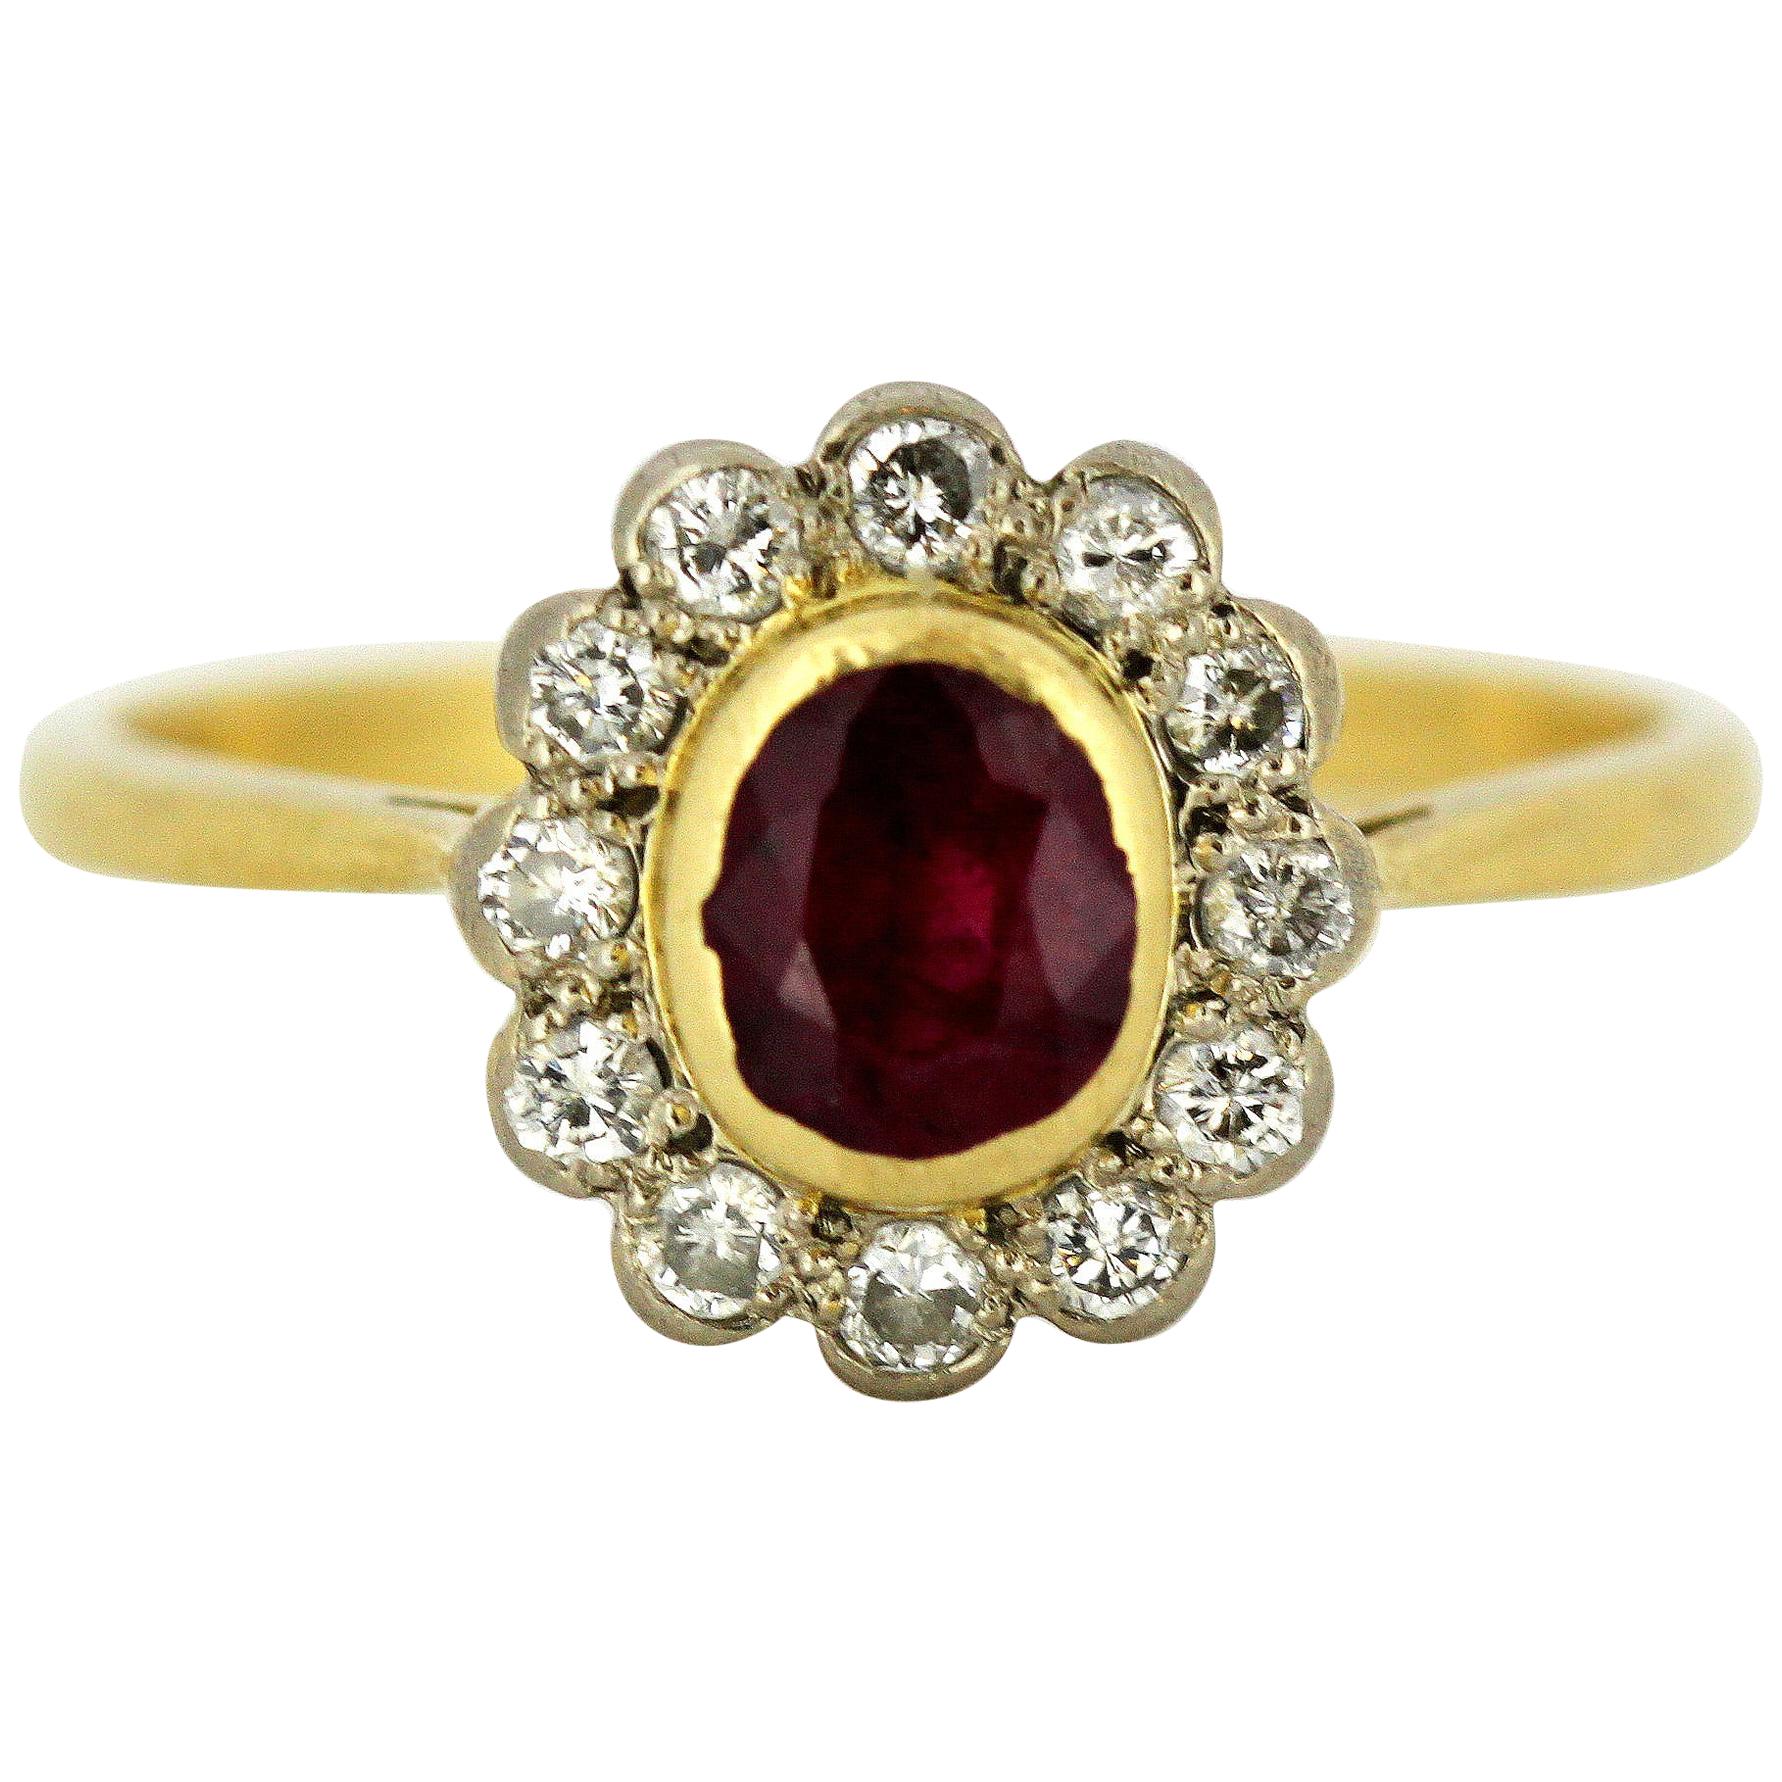 Vintage 18 Karat Gold Ladies Ring with Natural Ruby and Diamonds, London, 1985